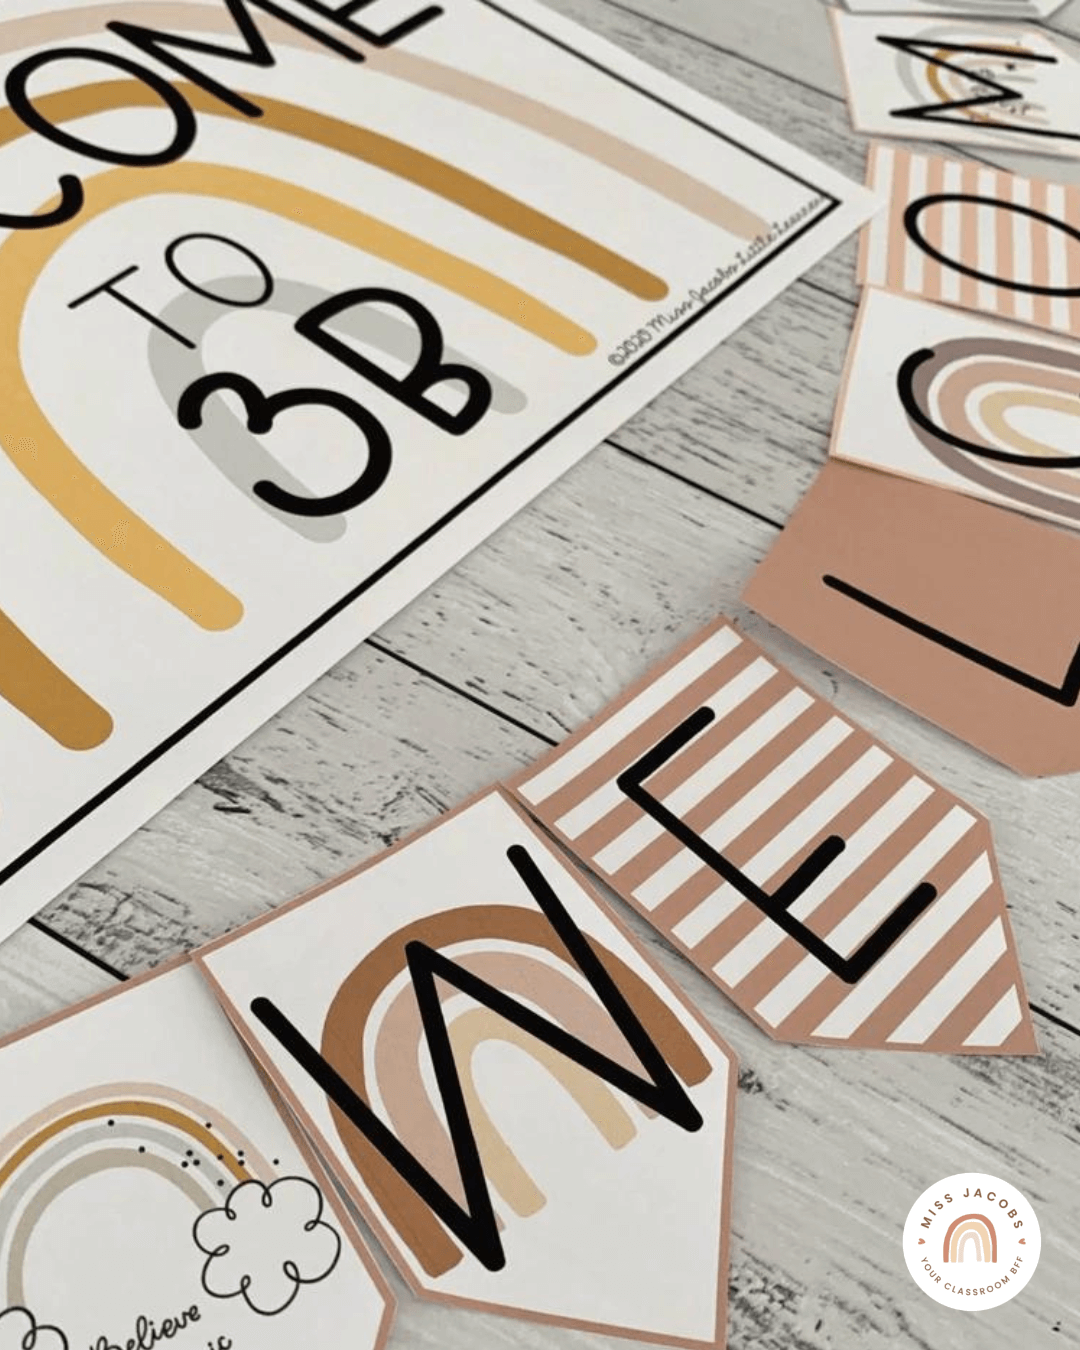 Two flatlay images show a range of name labels and welcome signs, all in earthy tones.